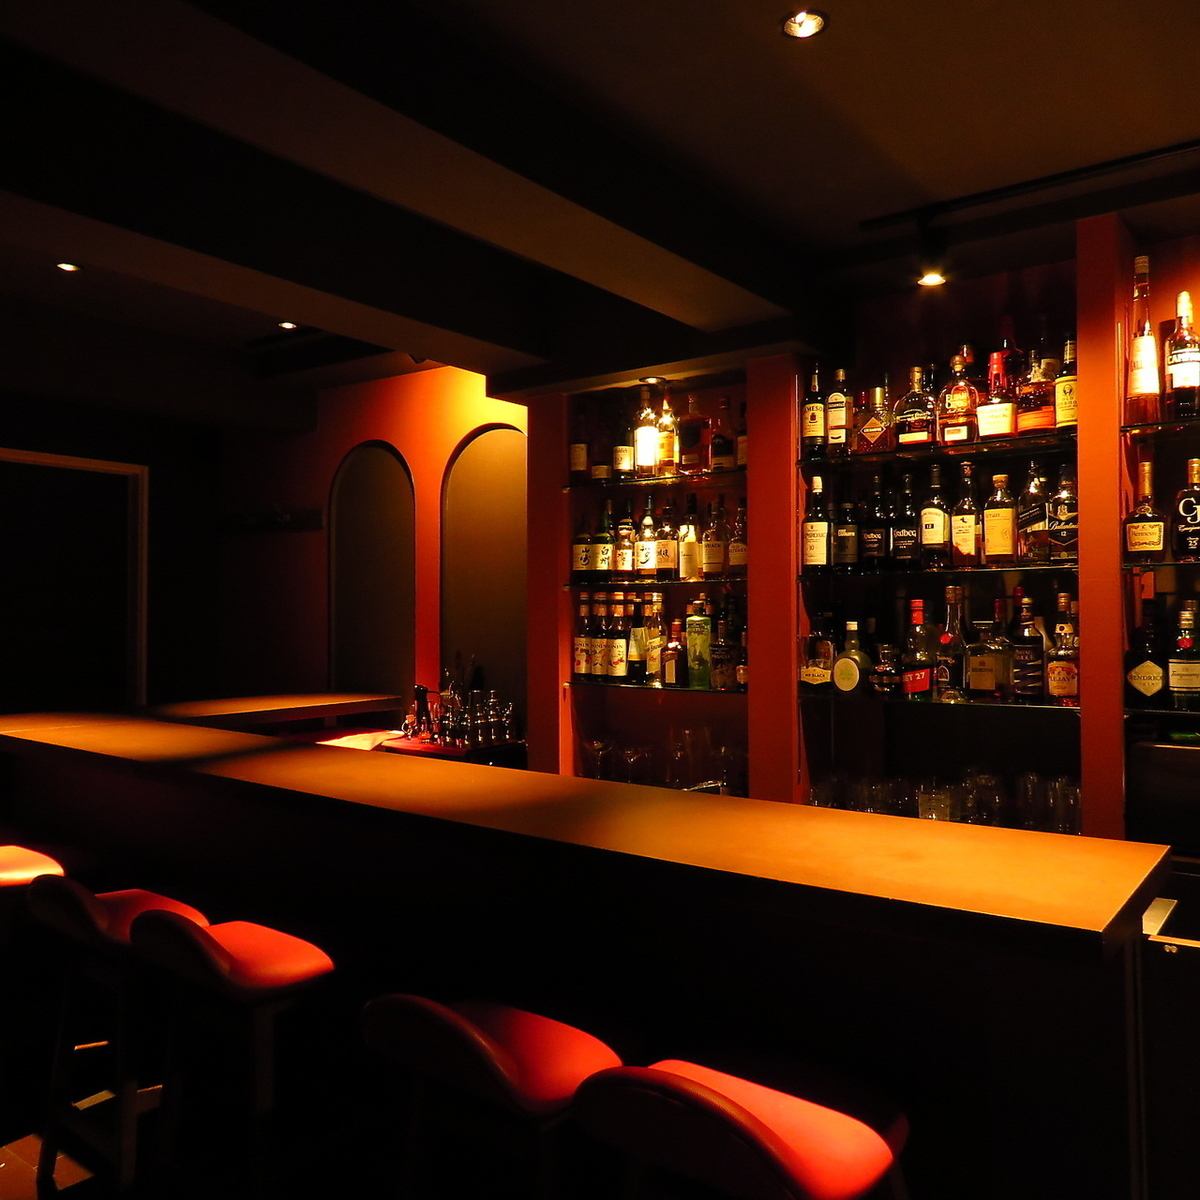 A stylish bar has opened in Tsukiji and Shintomicho where you can enjoy an extraordinary experience.